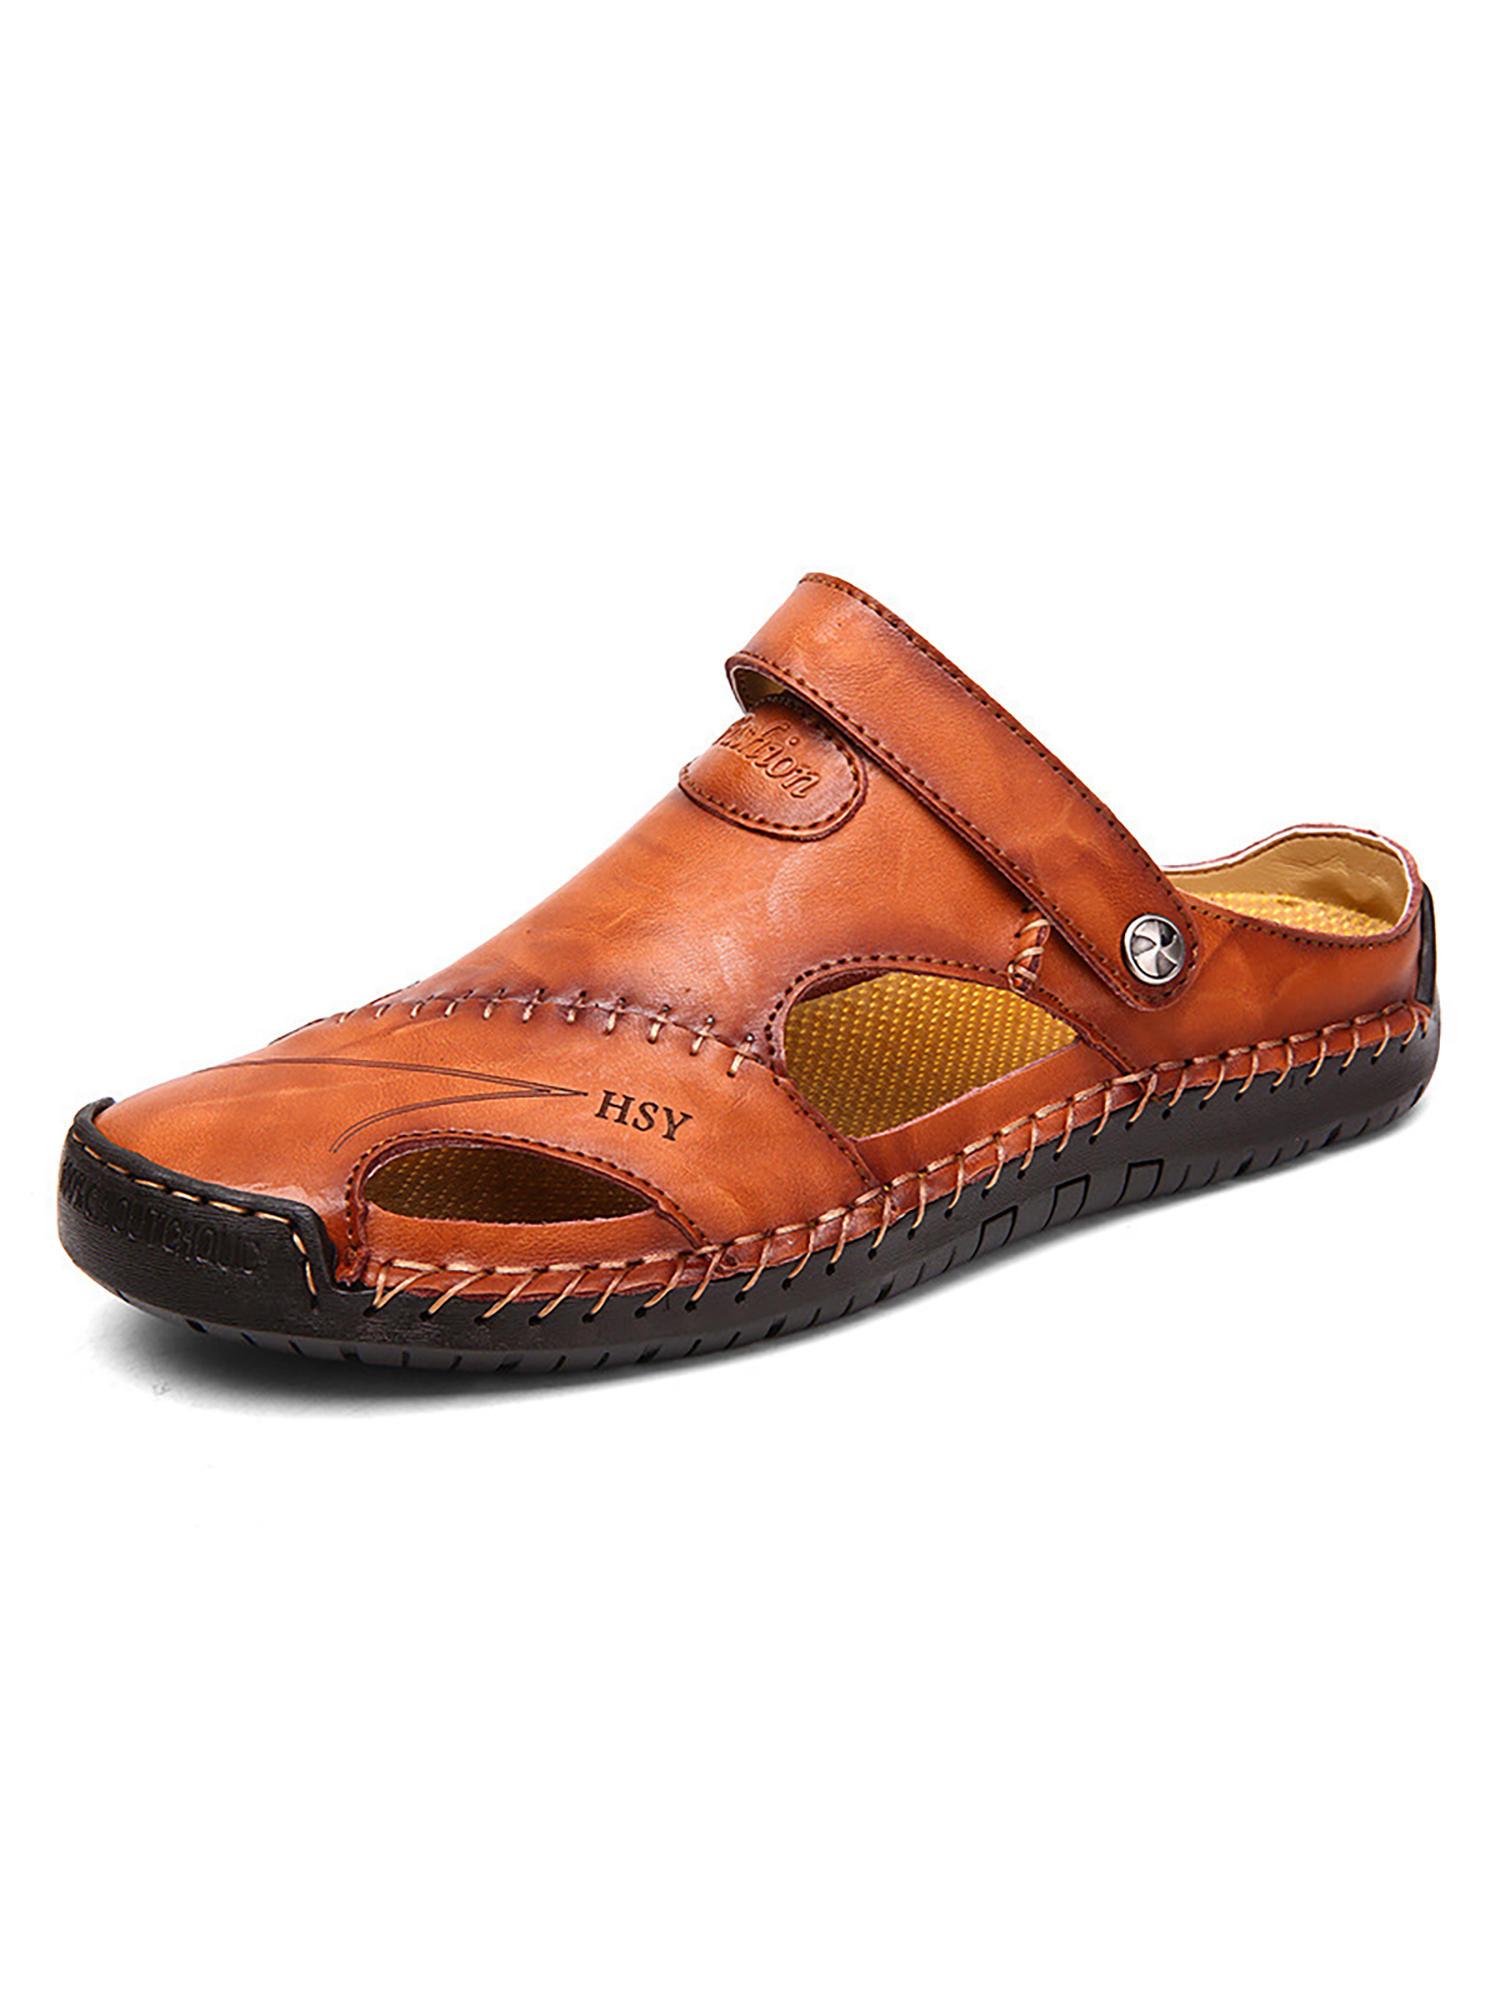 Avamo Mens Beach Sandals Leather Shoes Casual Summer Clogs Shoes Fashion Men Slippers - image 1 of 5